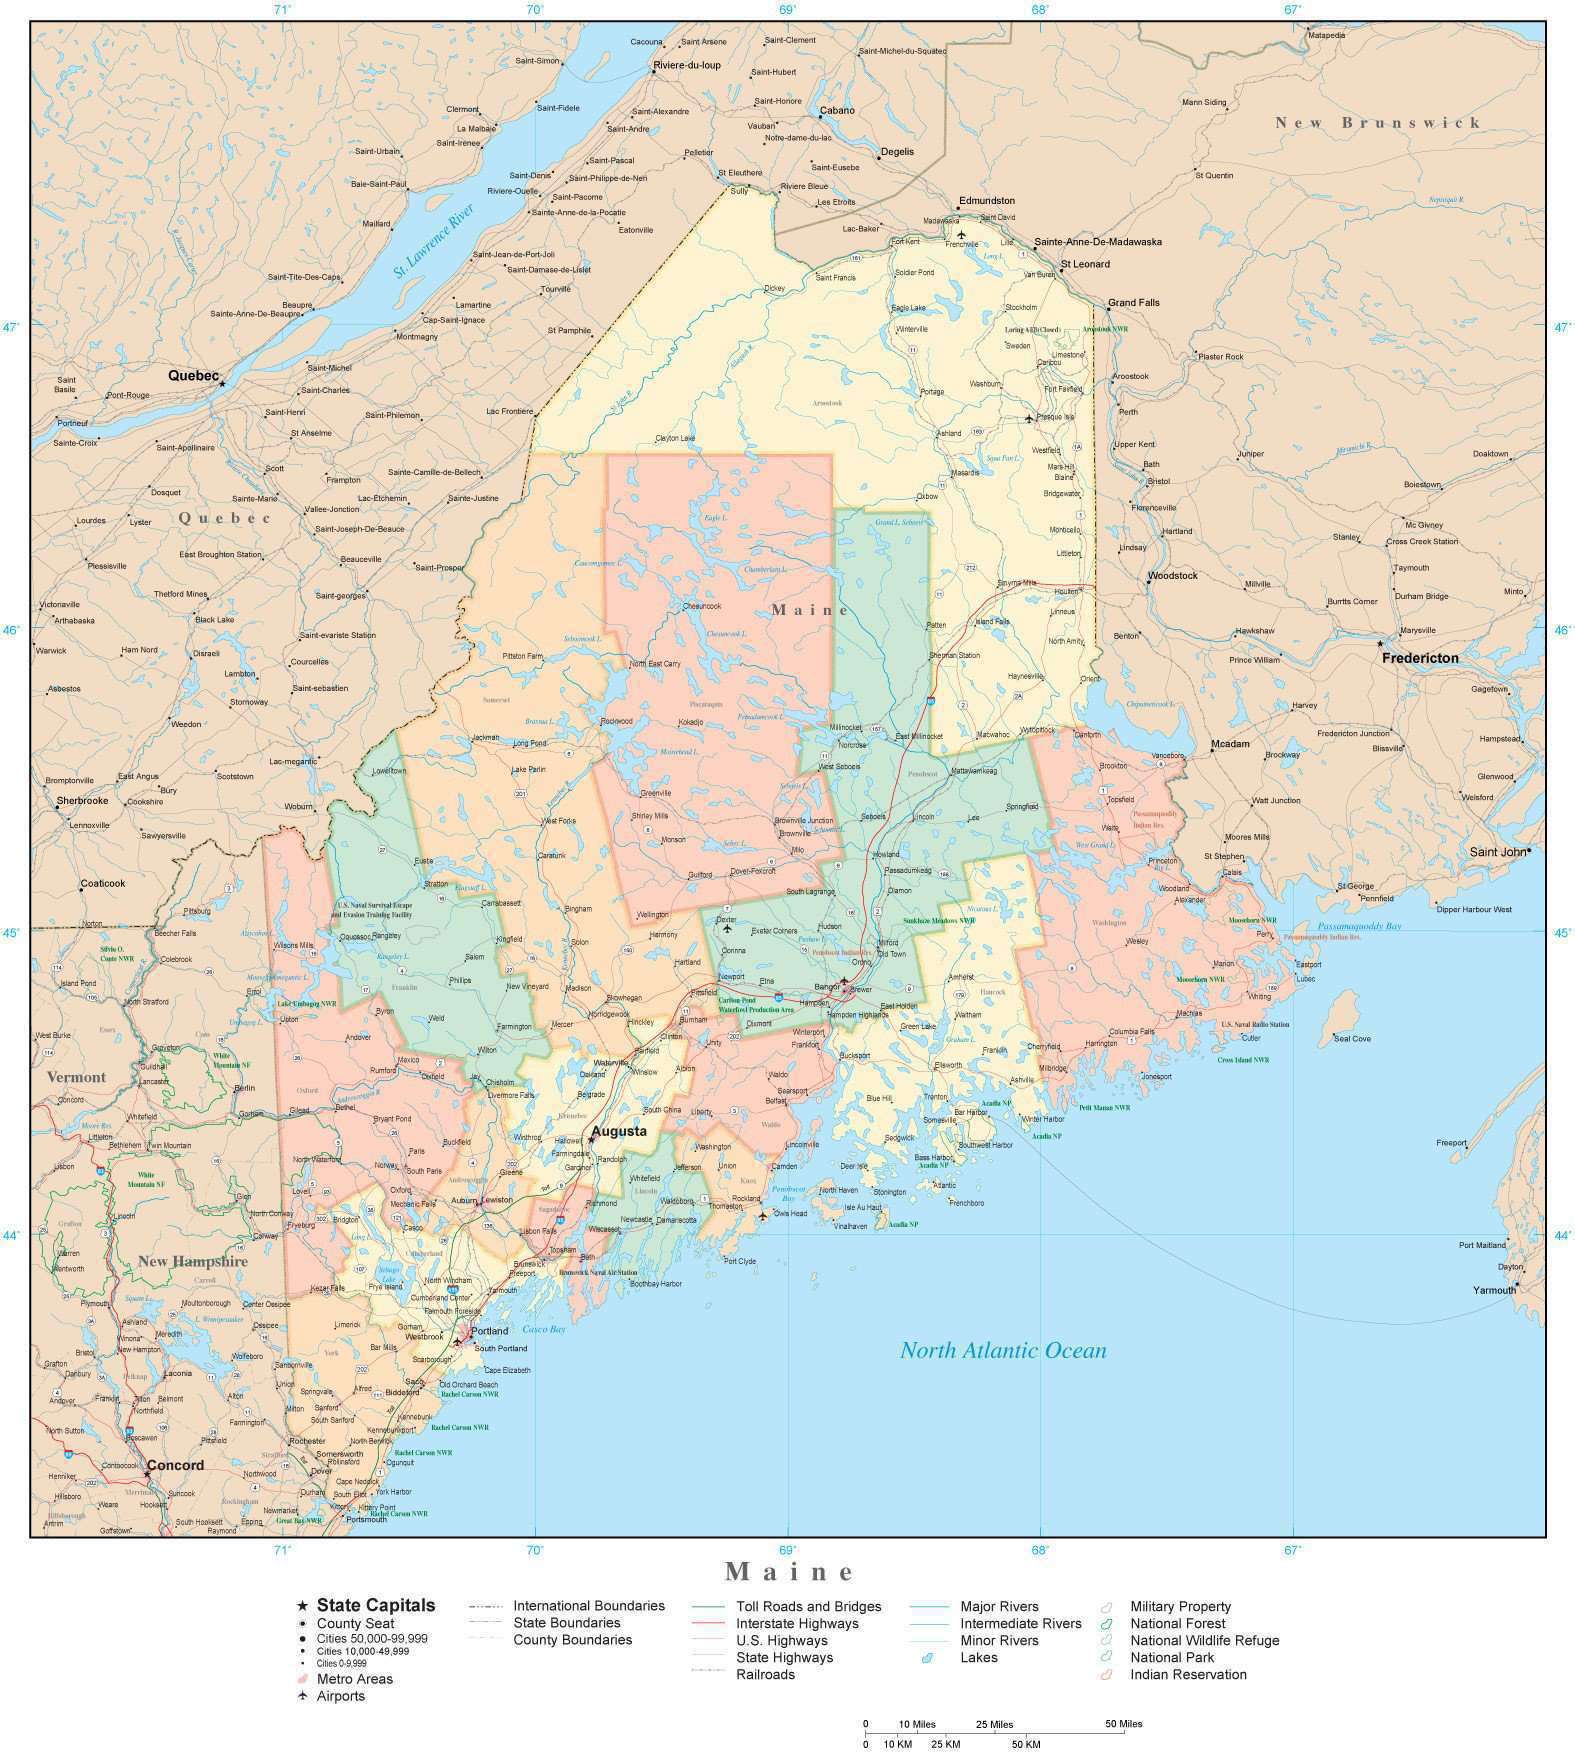 maine-state-map-in-adobe-illustrator-vector-format-detailed-editable-map-from-map-resources